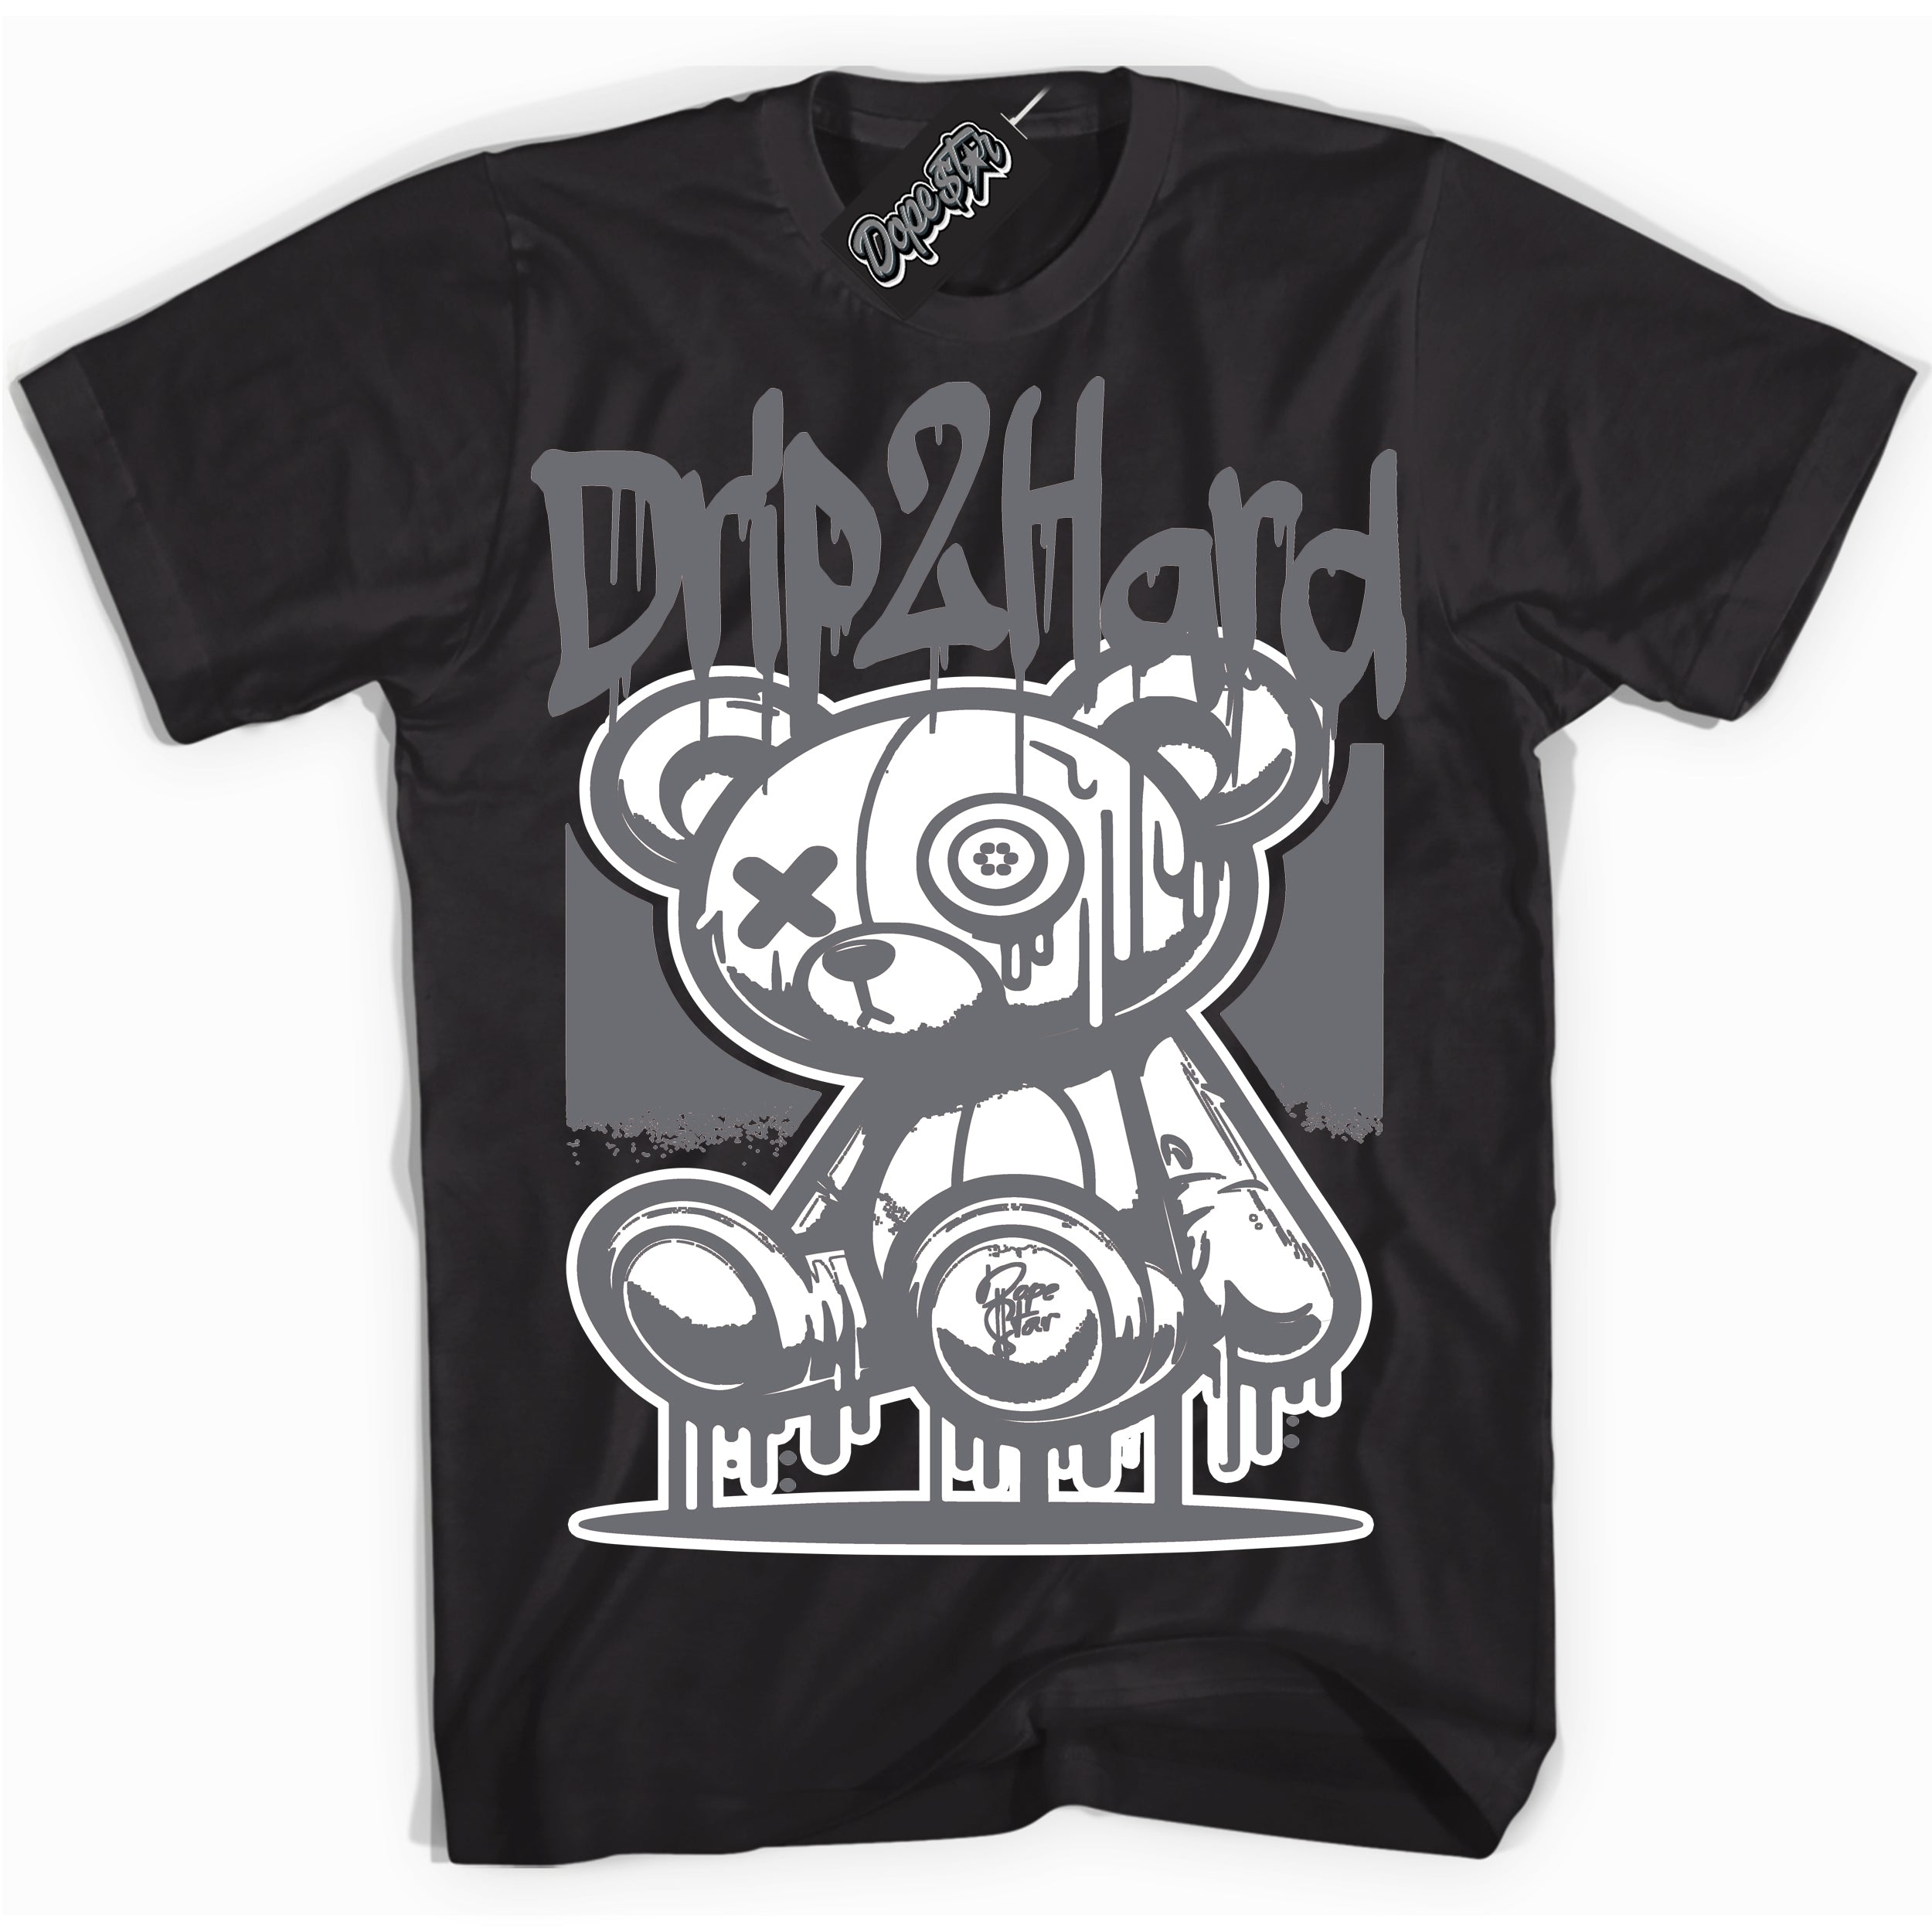 Cool Black graphic tee with “ Drip 2 Hard ” design, that perfectly matches Stealth 1s